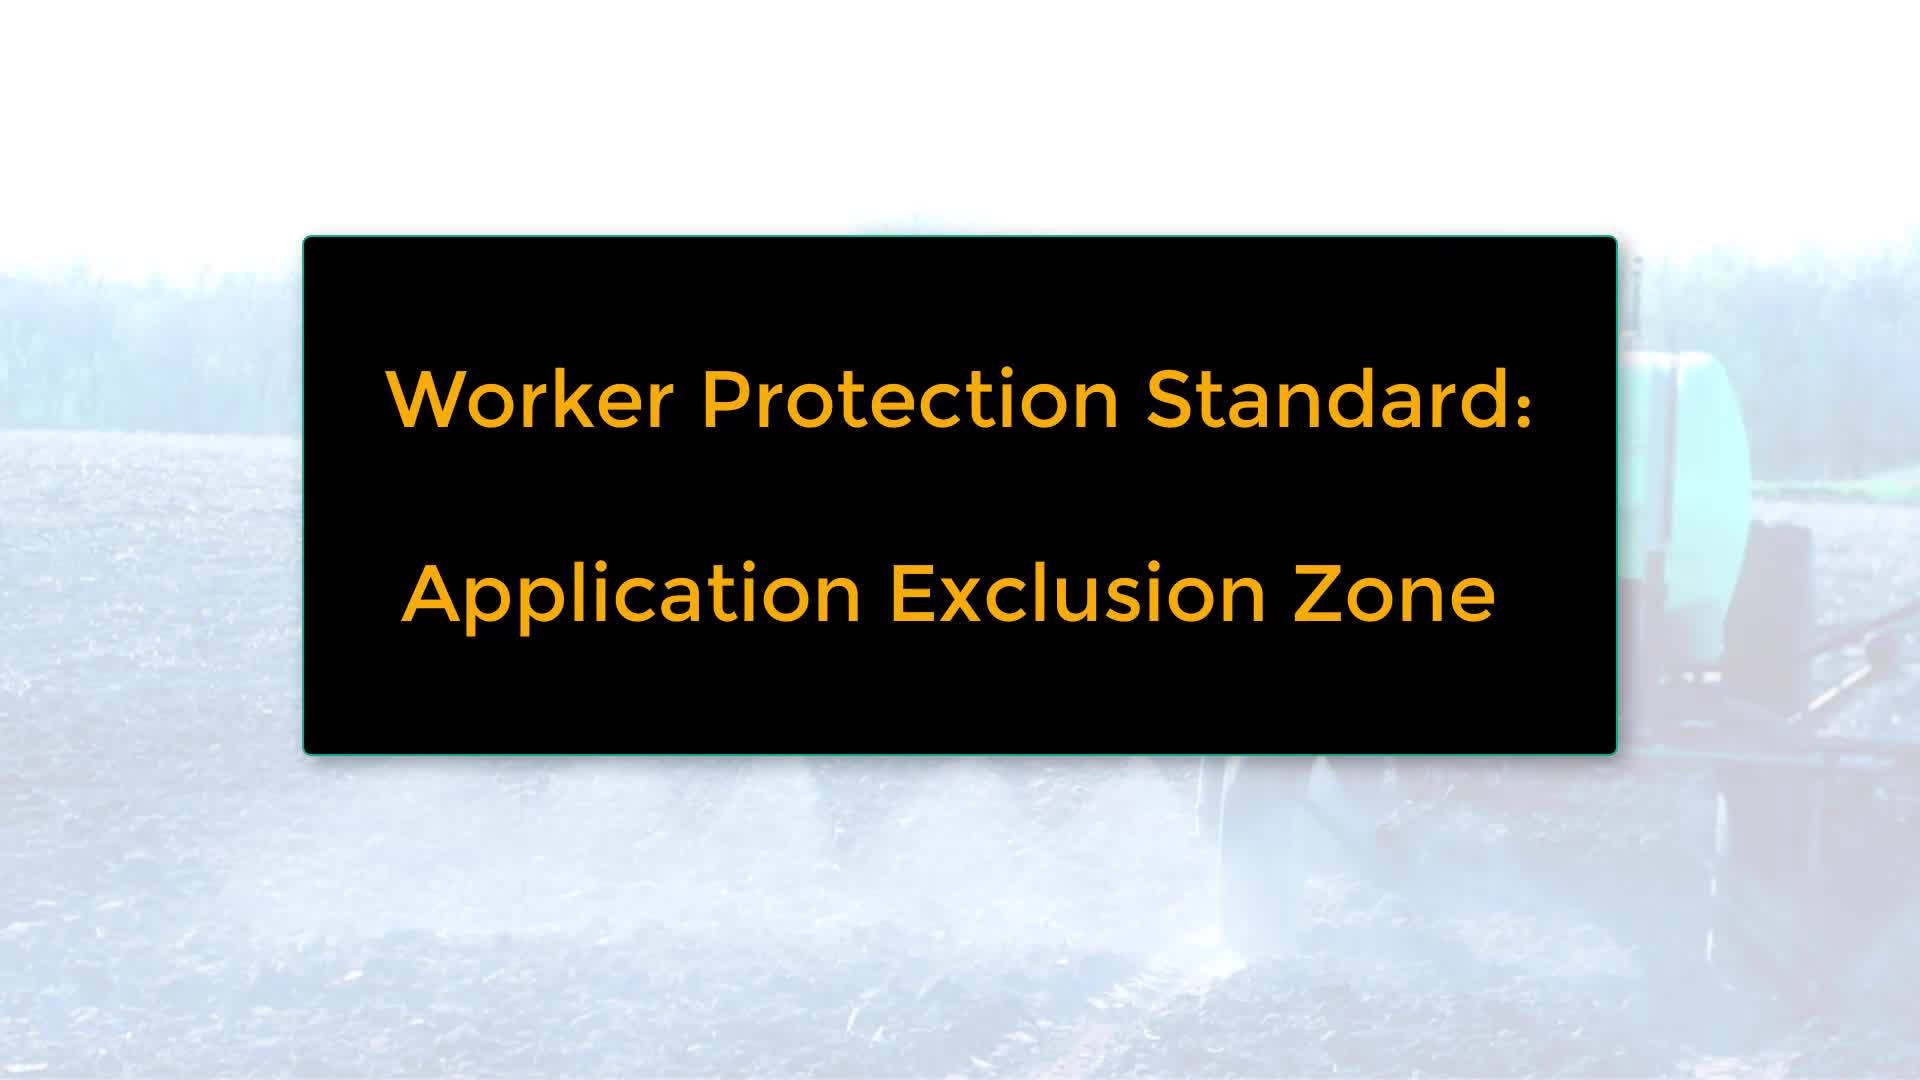 Application Exclusion Zone